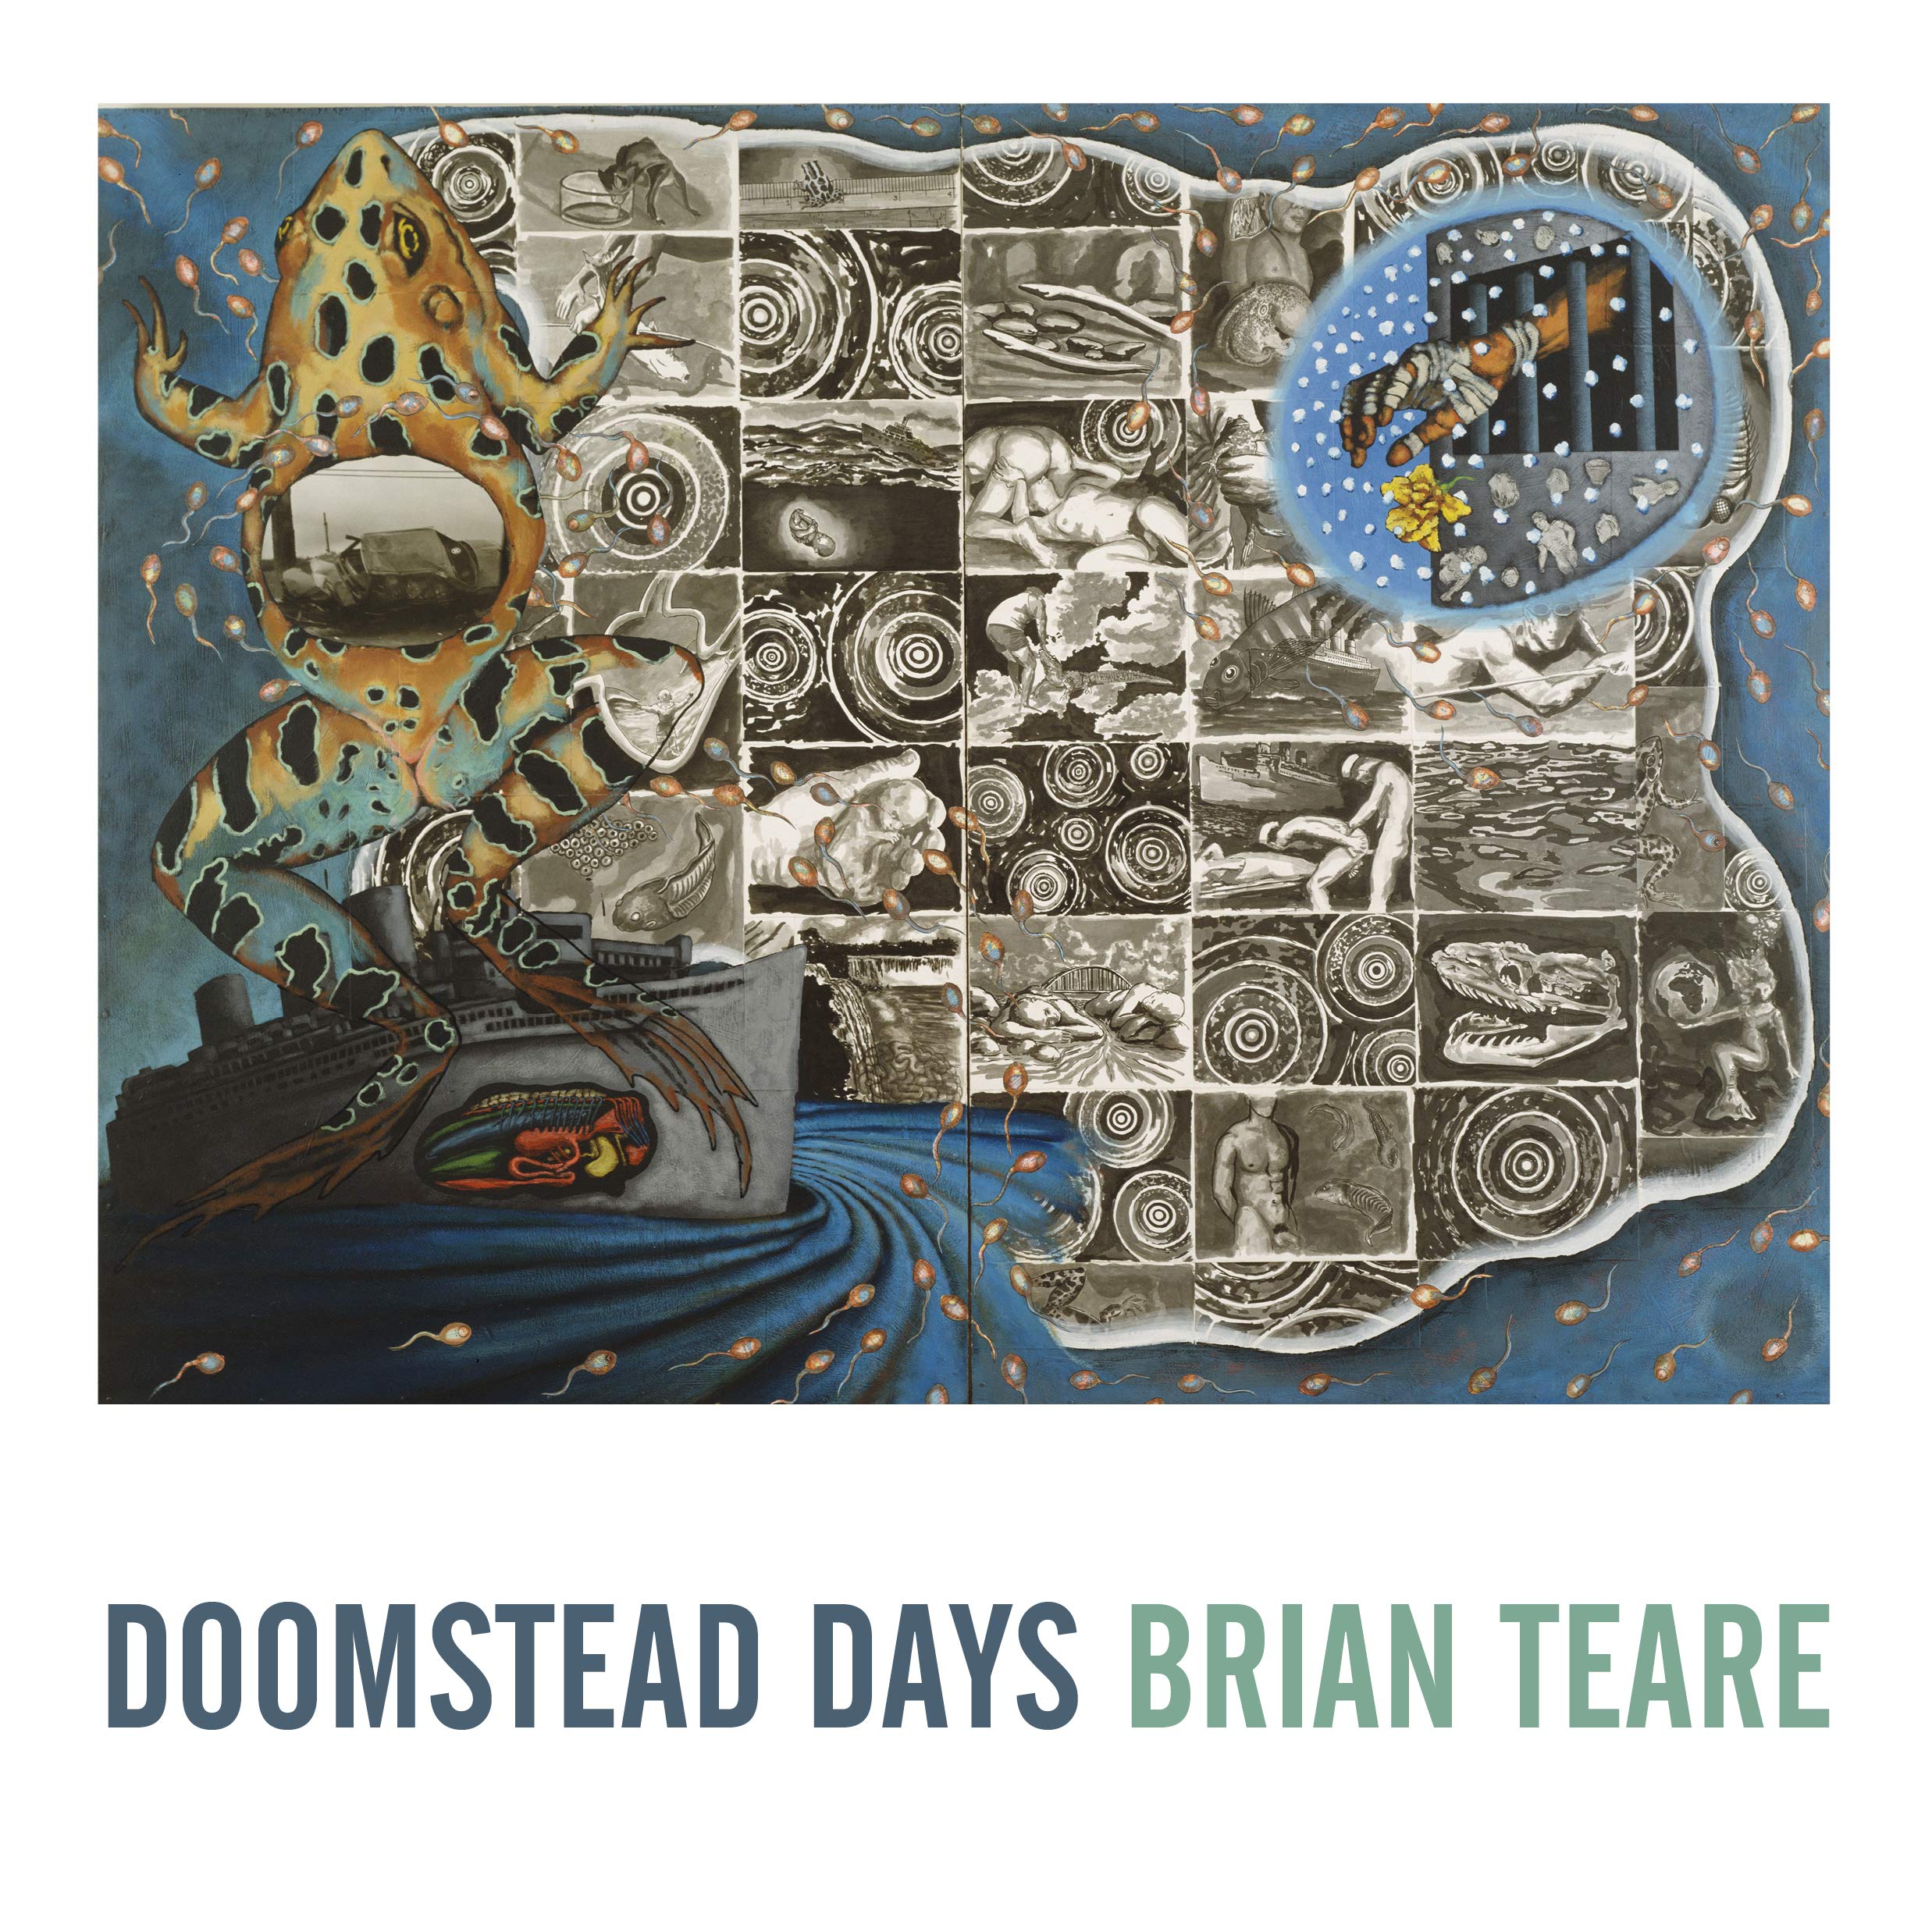 Doomstead Days by Brian Teare (Nighboat Books)